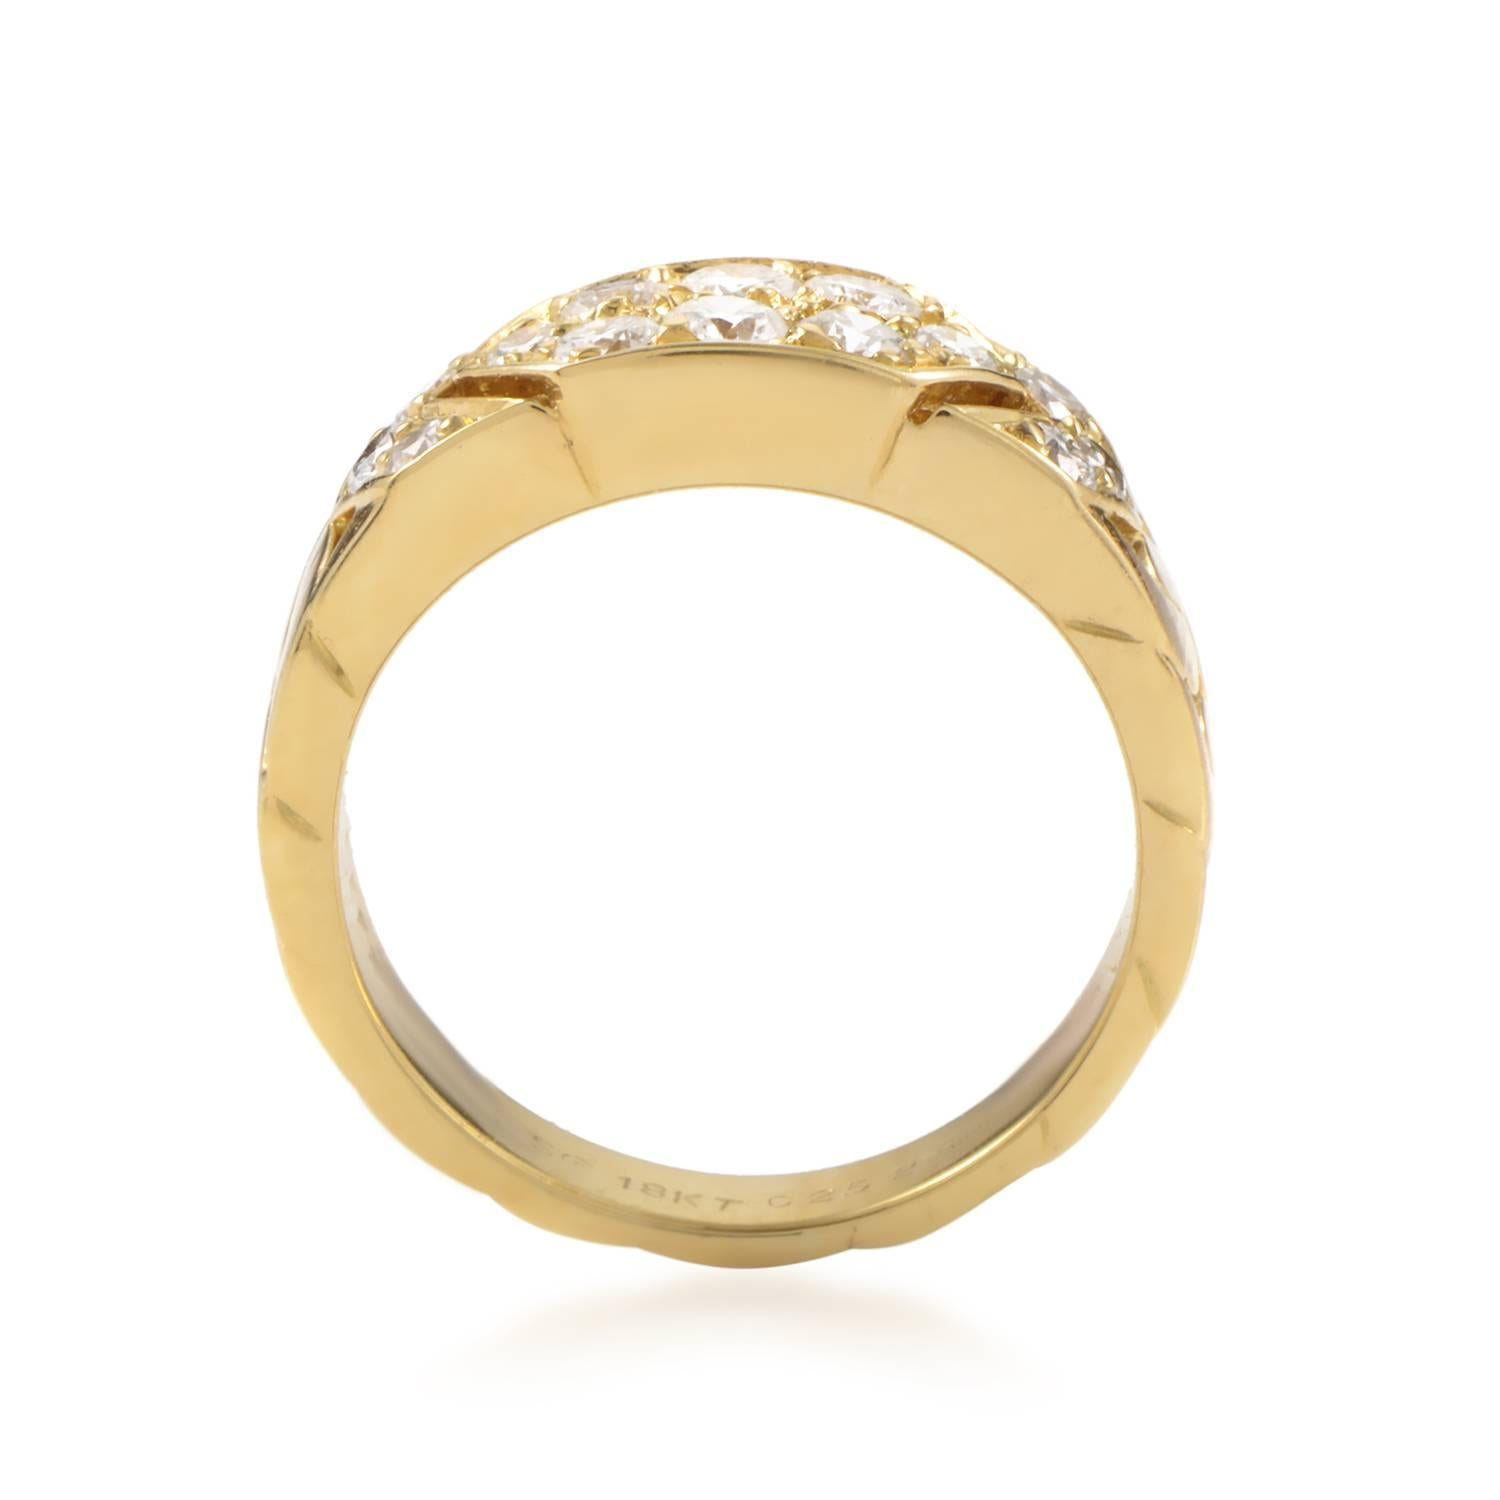 Simple and sweet are the perfect words for this band ring from Van Cleef & Arpels. The ring is made of 18K yellow gold and is paved with .60ct of diamonds.
Ring Top Dimensions: 18 x 6mm
Band Thickness: 4 mm
Ring Top Height: 3 mm
Ring Size: 5.0